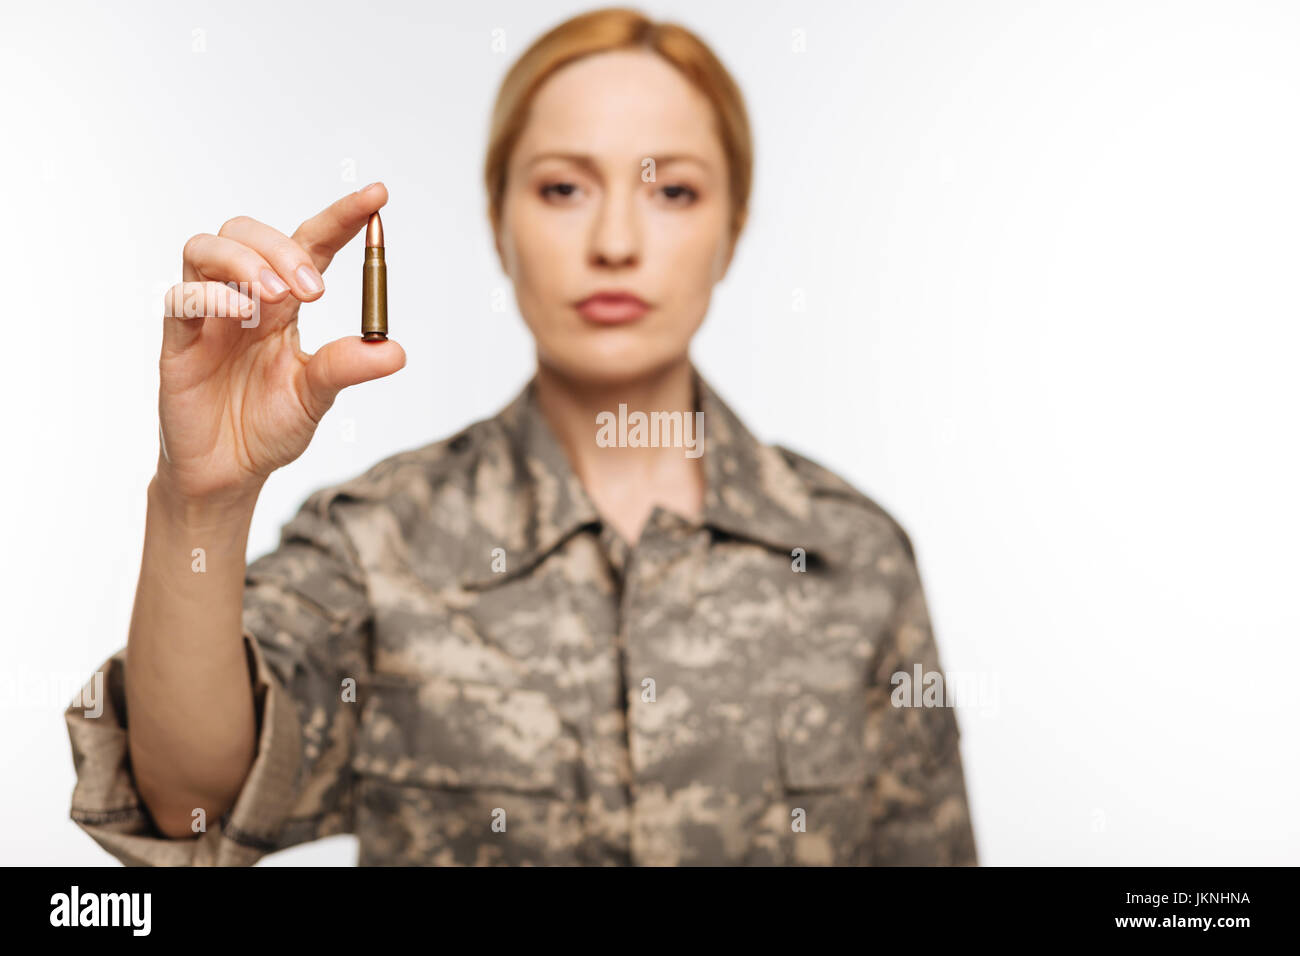 Fearless confident woman showing a bullet Stock Photo